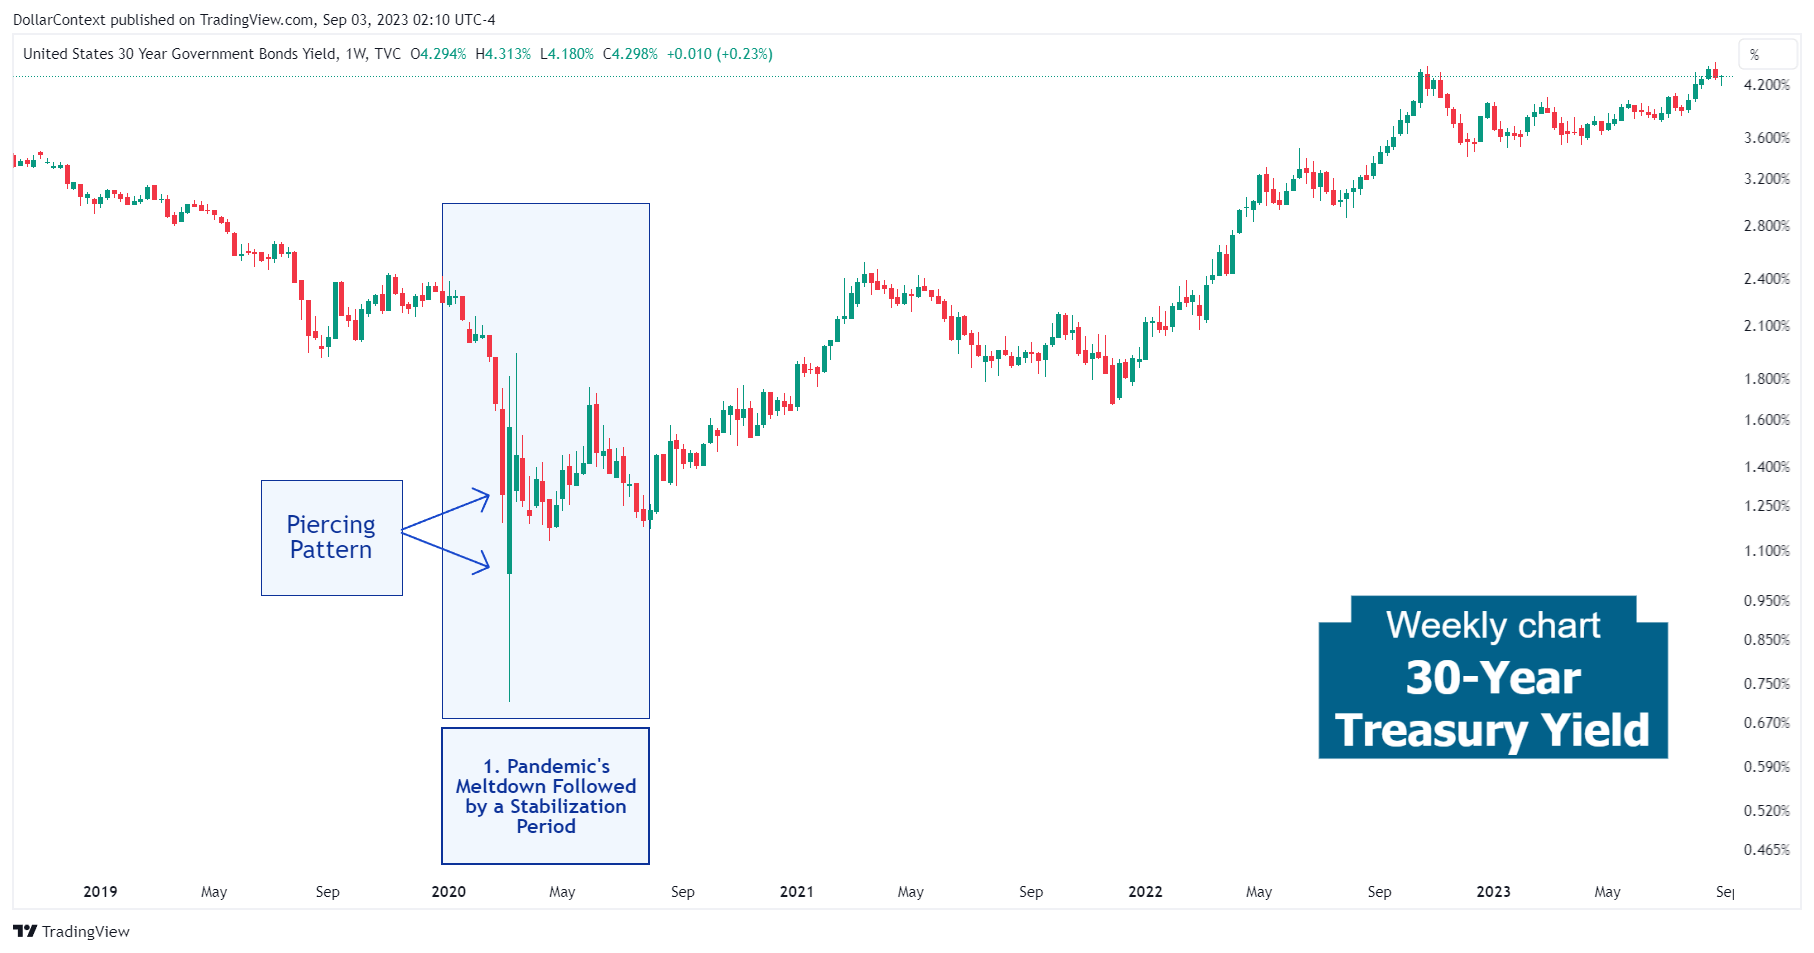 30-Year Treasury Yield: The Extremely Volatile Market in Early 2020 (Weekly Chart)